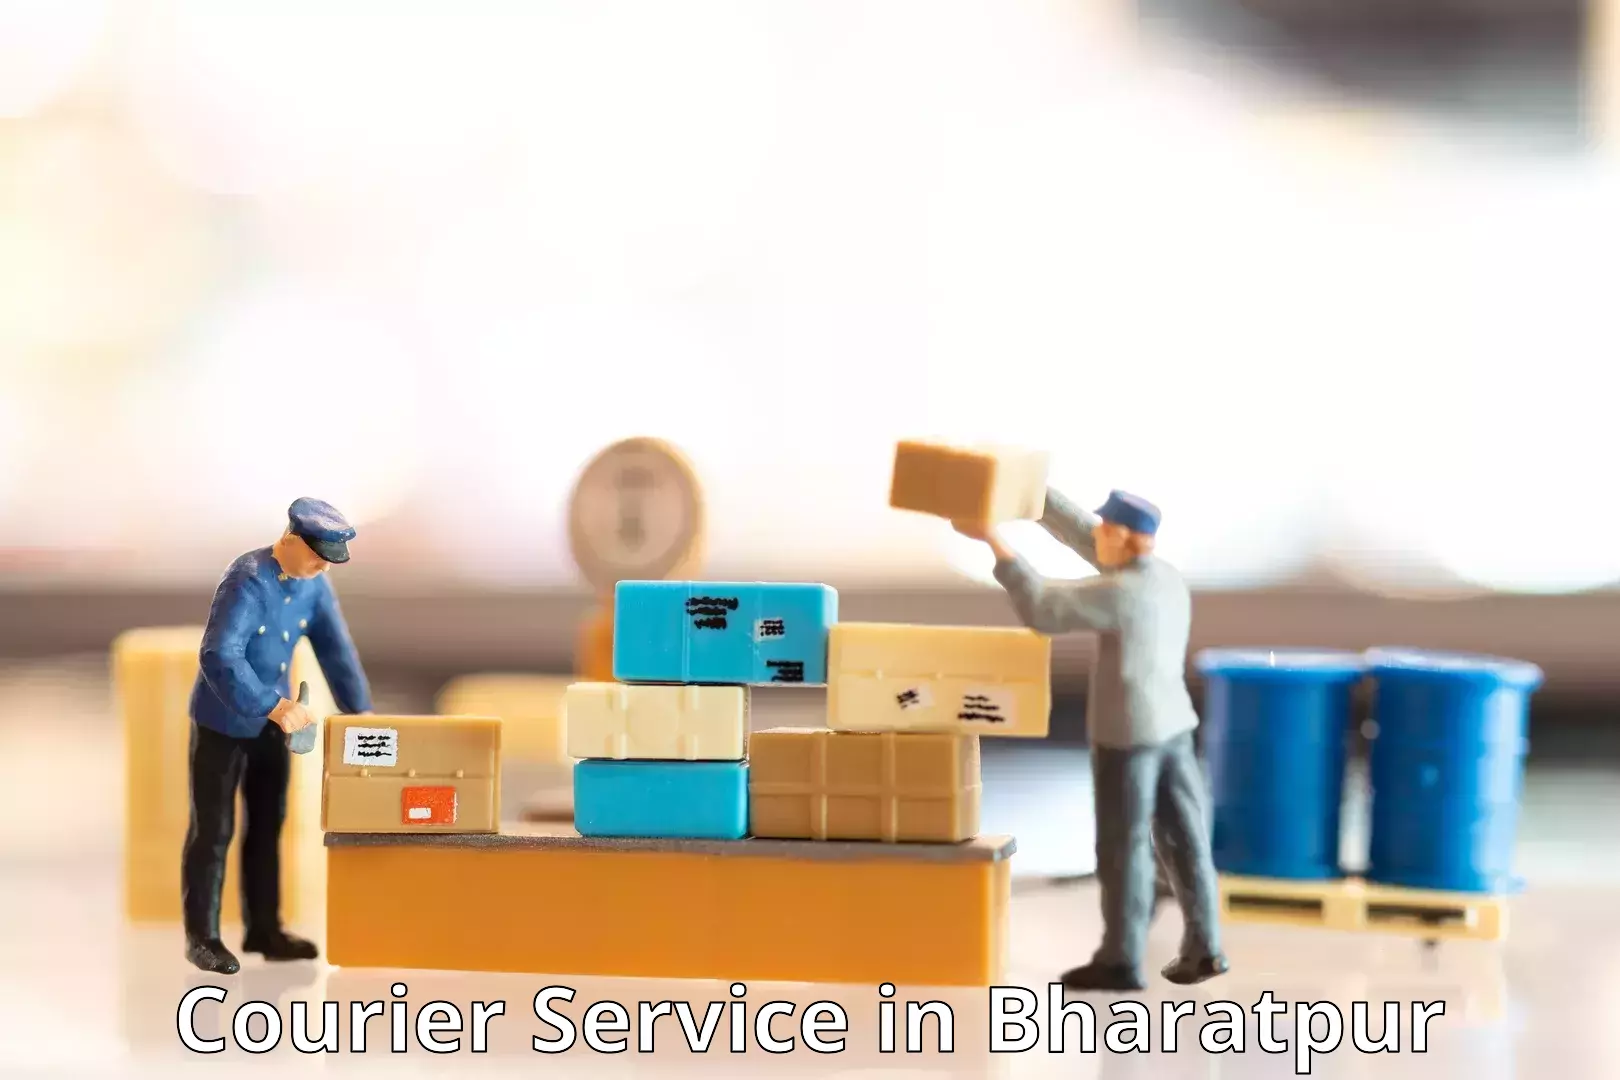 Customer-oriented courier services in Bharatpur